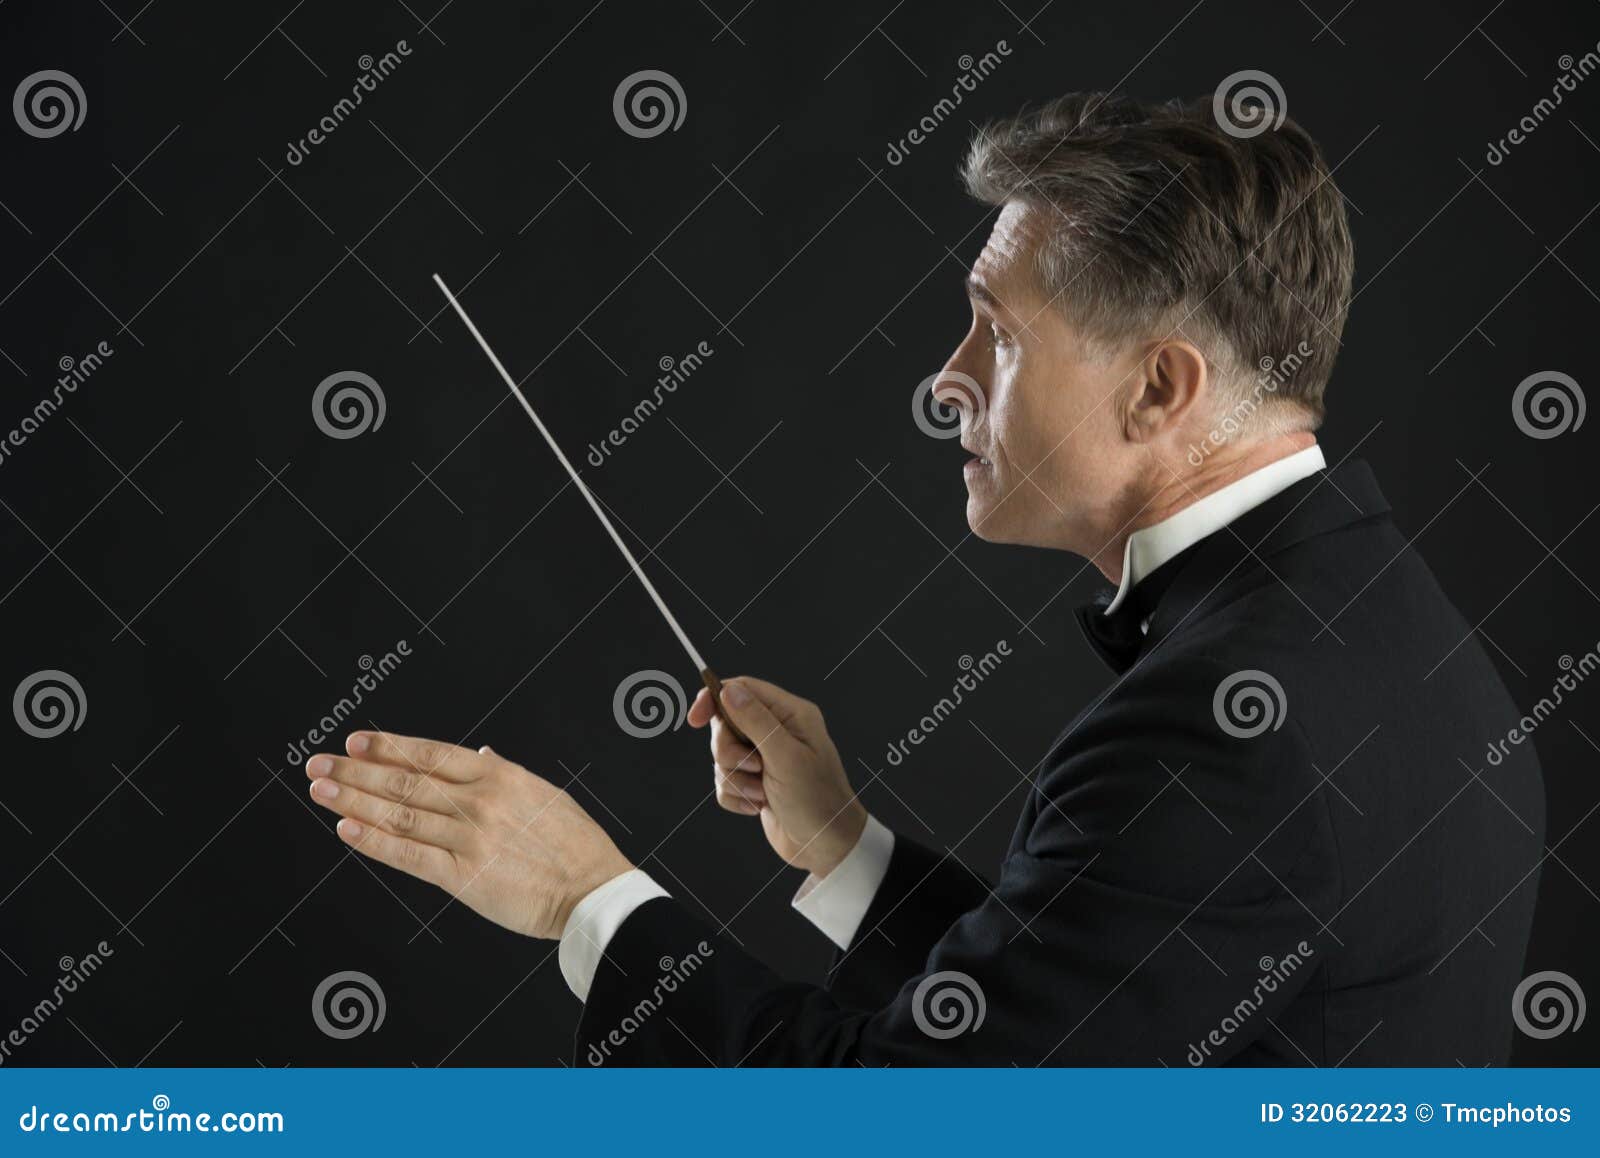 male orchestra conductor directing with his baton